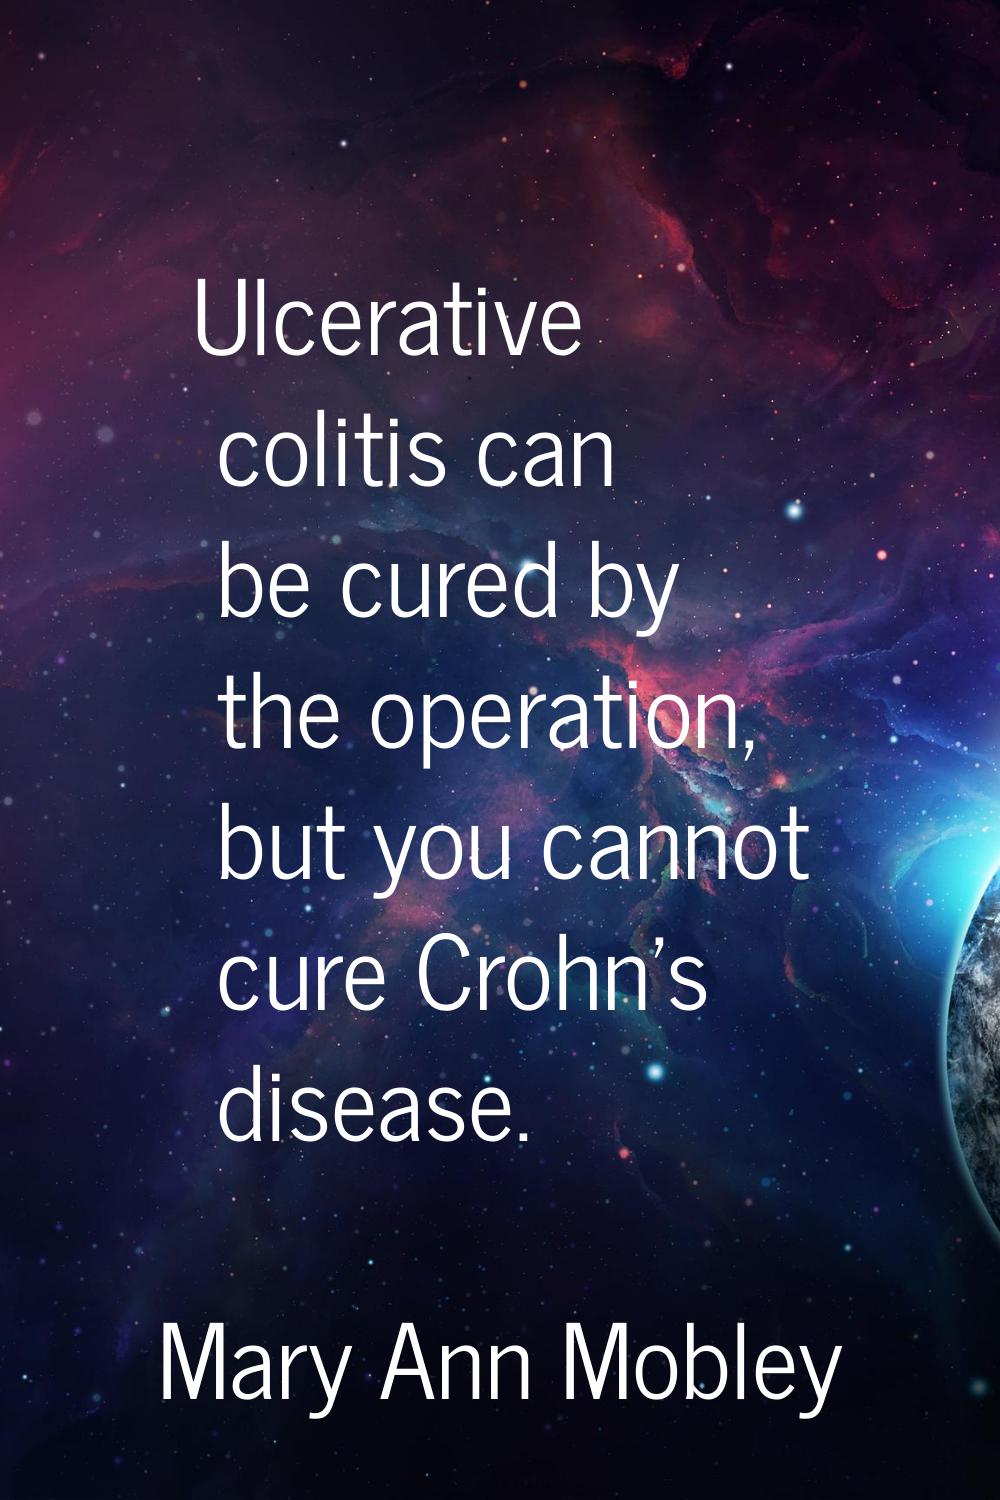 Ulcerative colitis can be cured by the operation, but you cannot cure Crohn's disease.